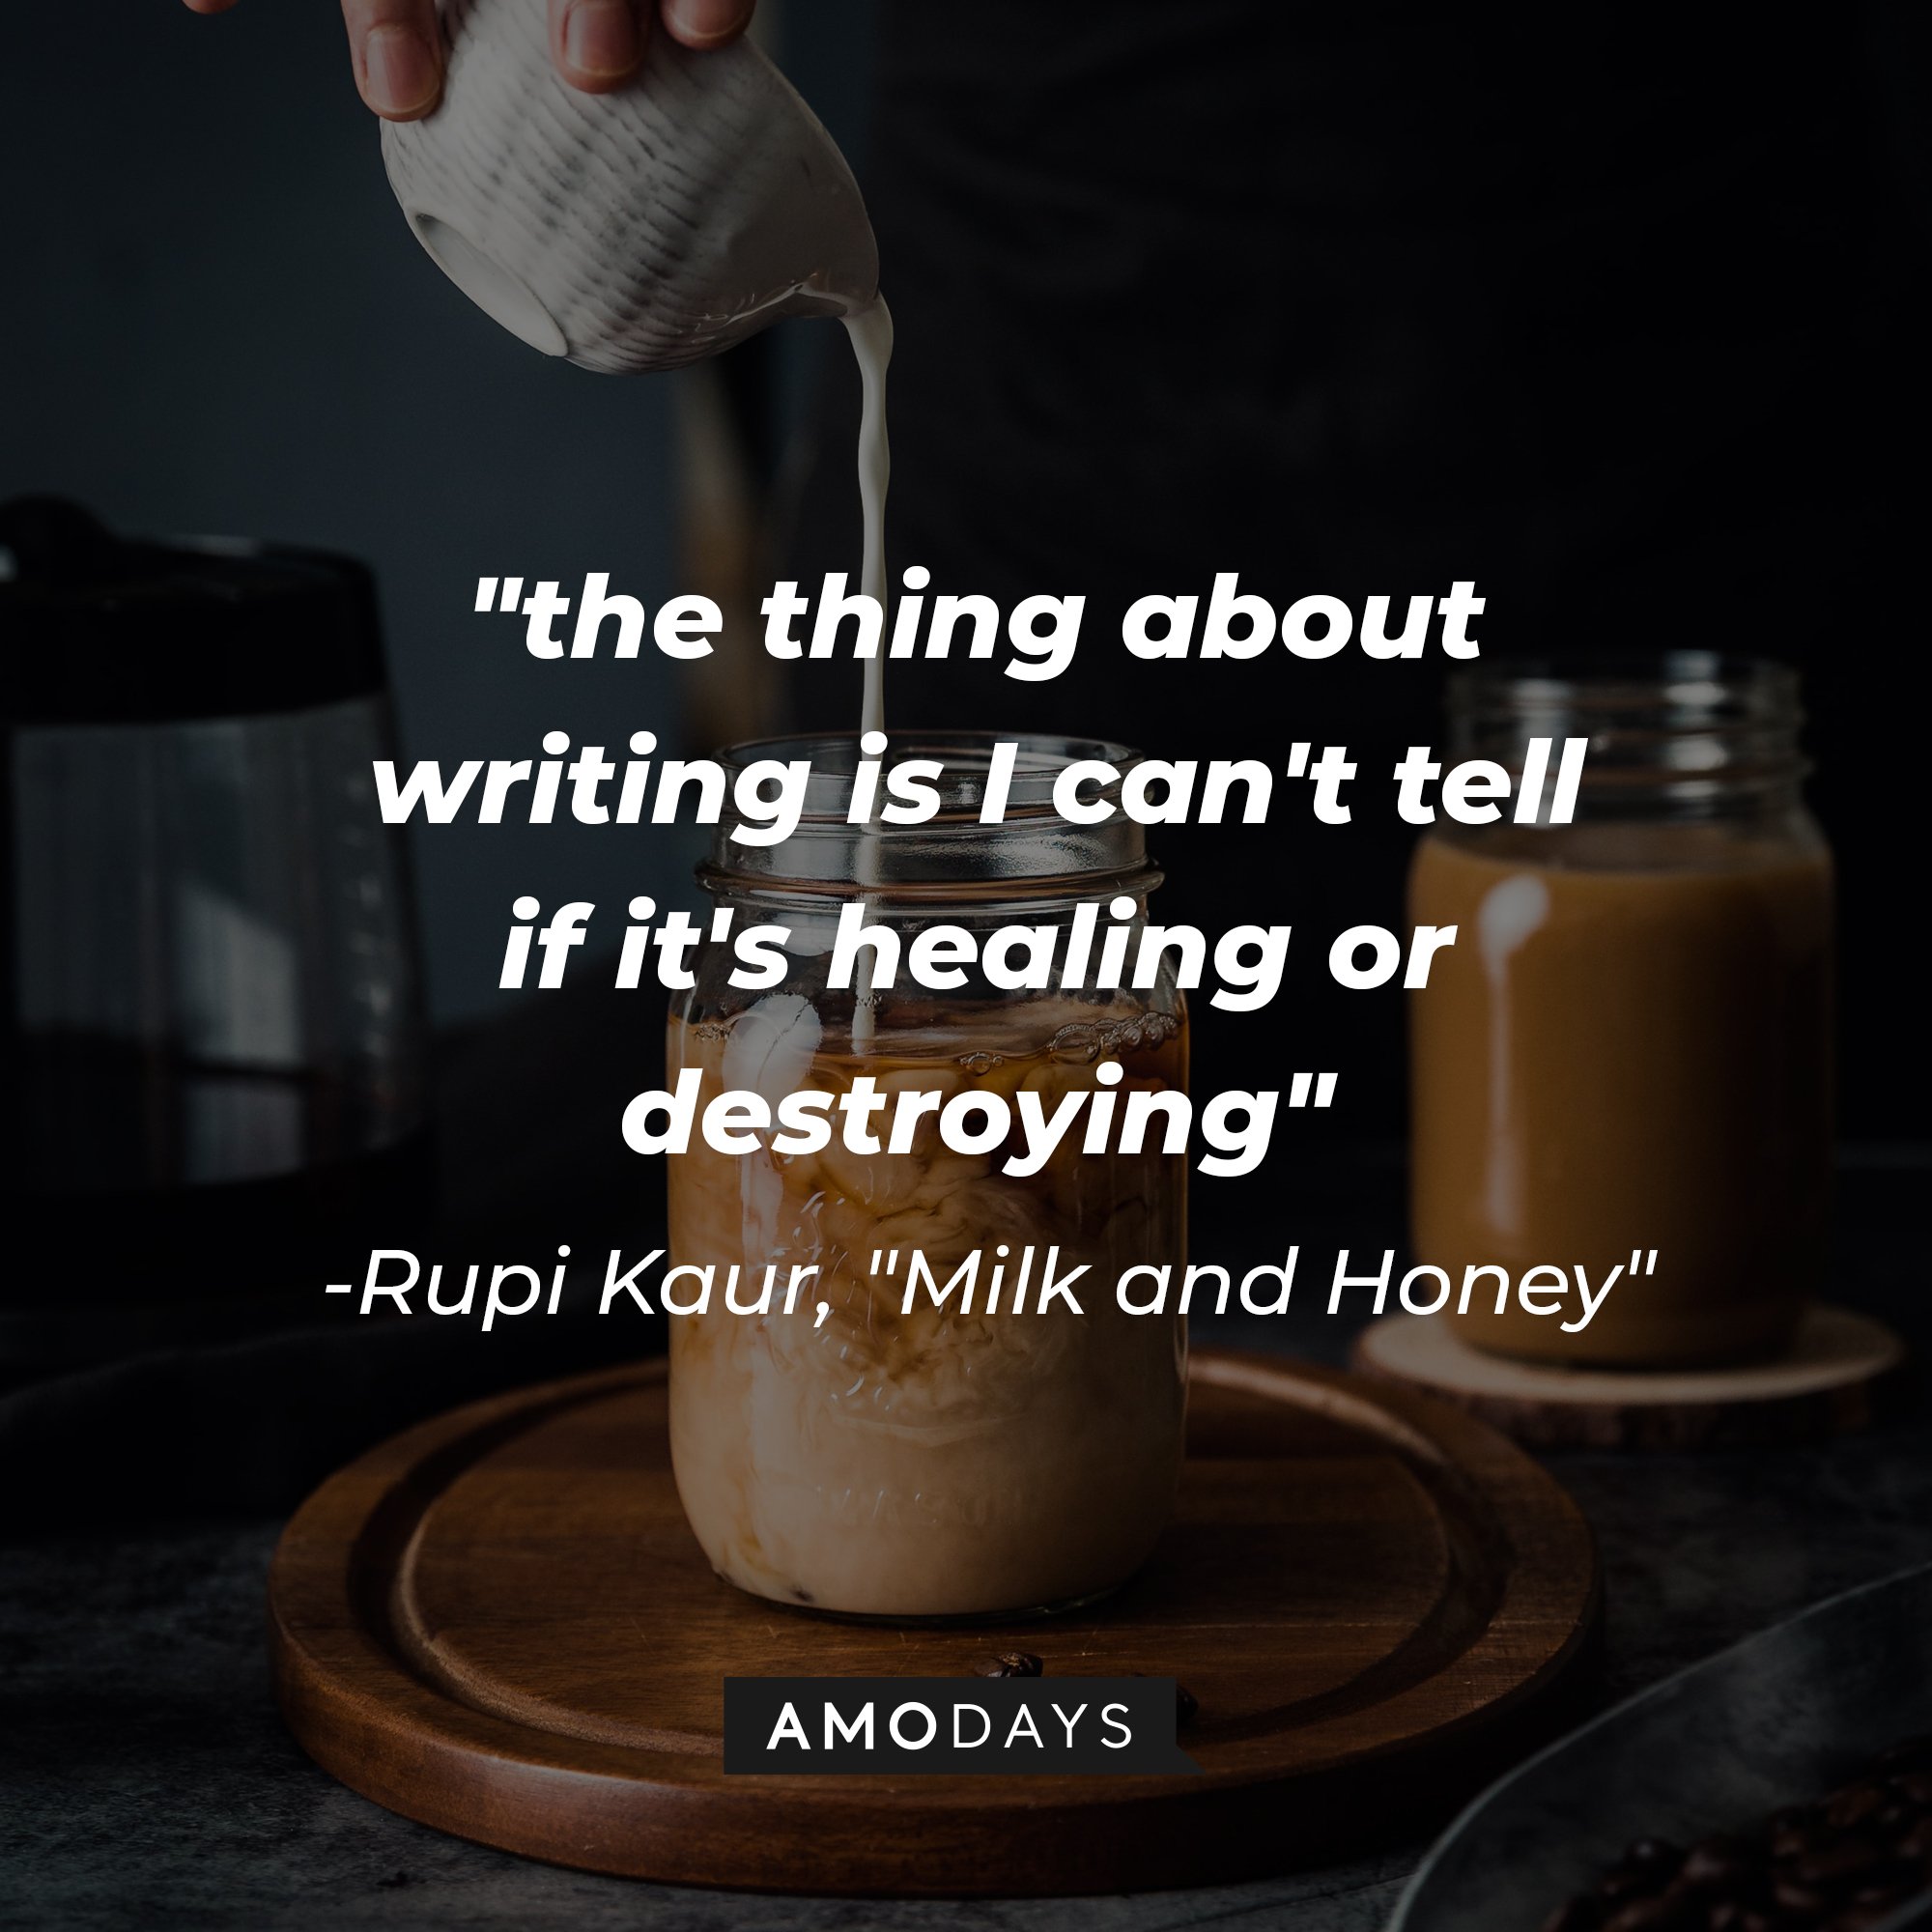 Rupi Kaur's "Milk and Honey" quote: "the thing about writing is I can't tell if it's healing or destroying" | Image: AmoDays